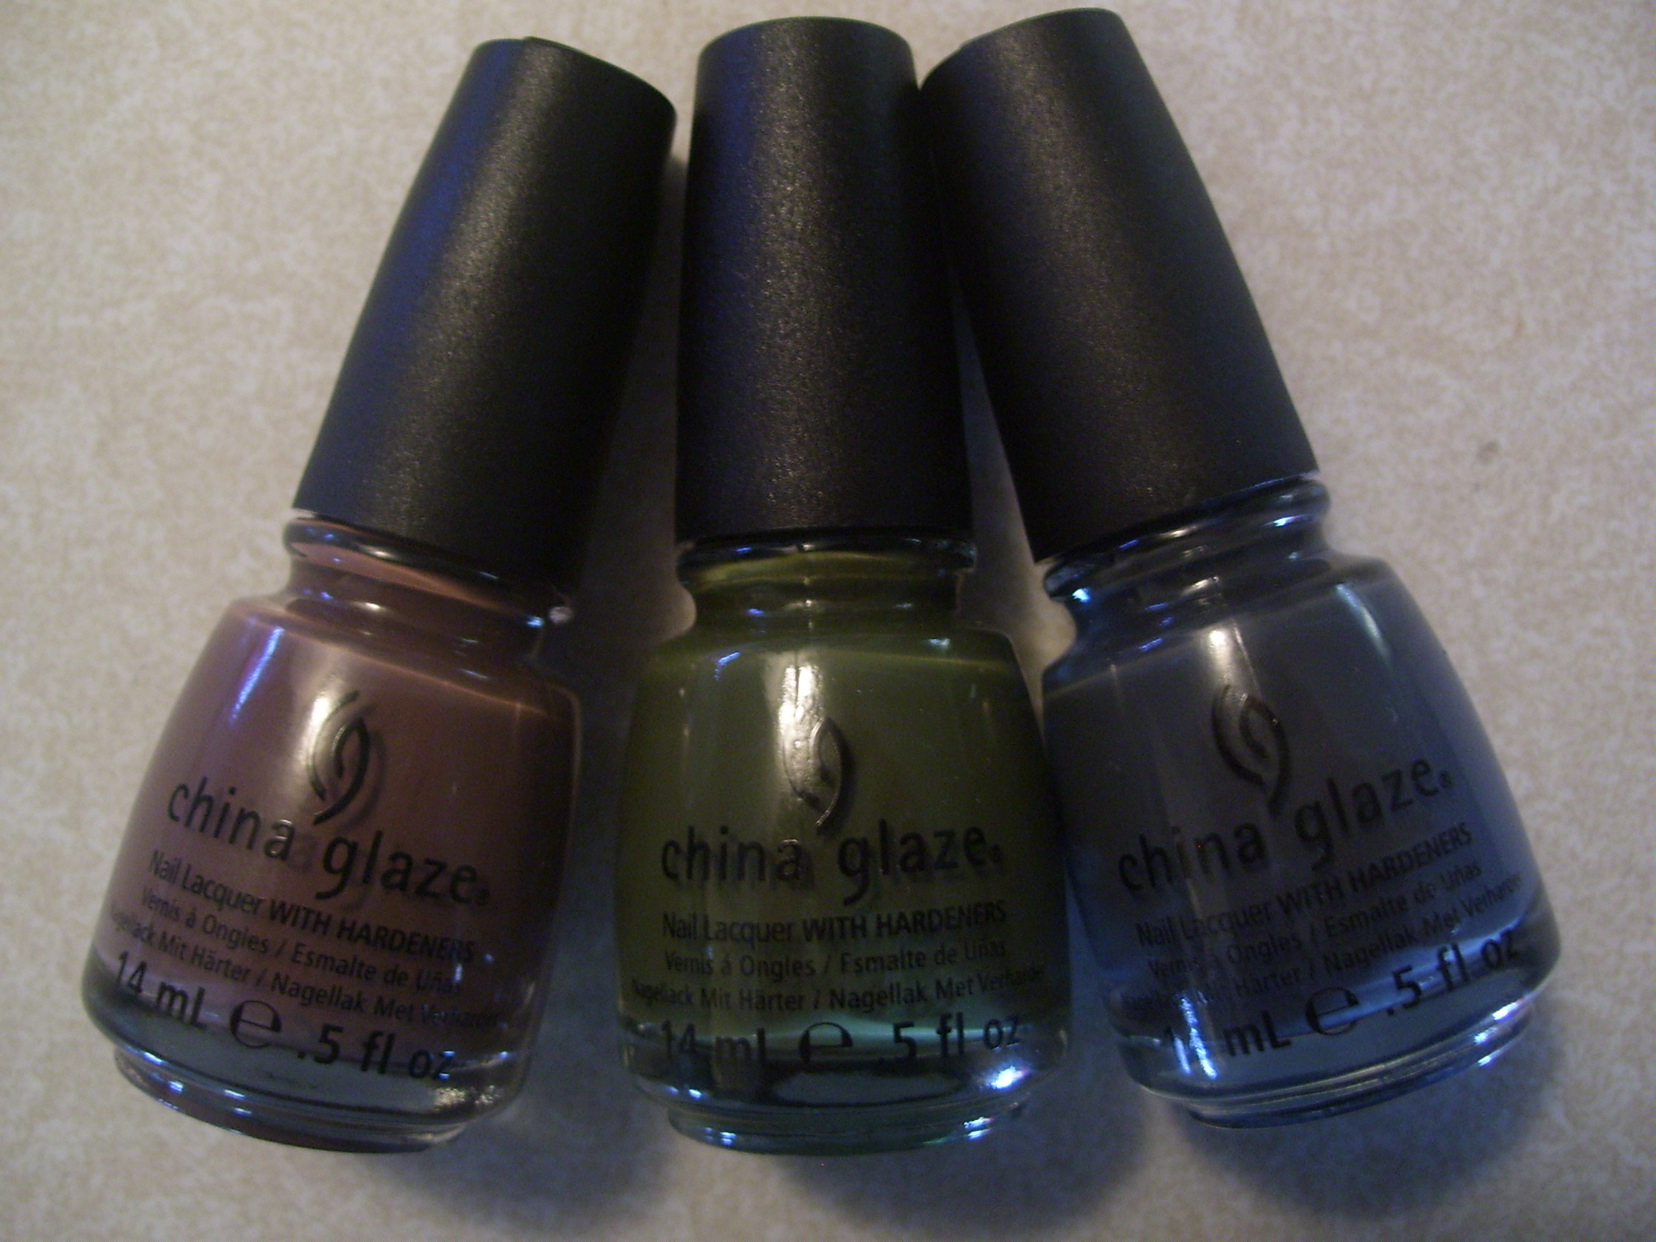 Coming Soon! Swatches of China Glaze Metro Collection